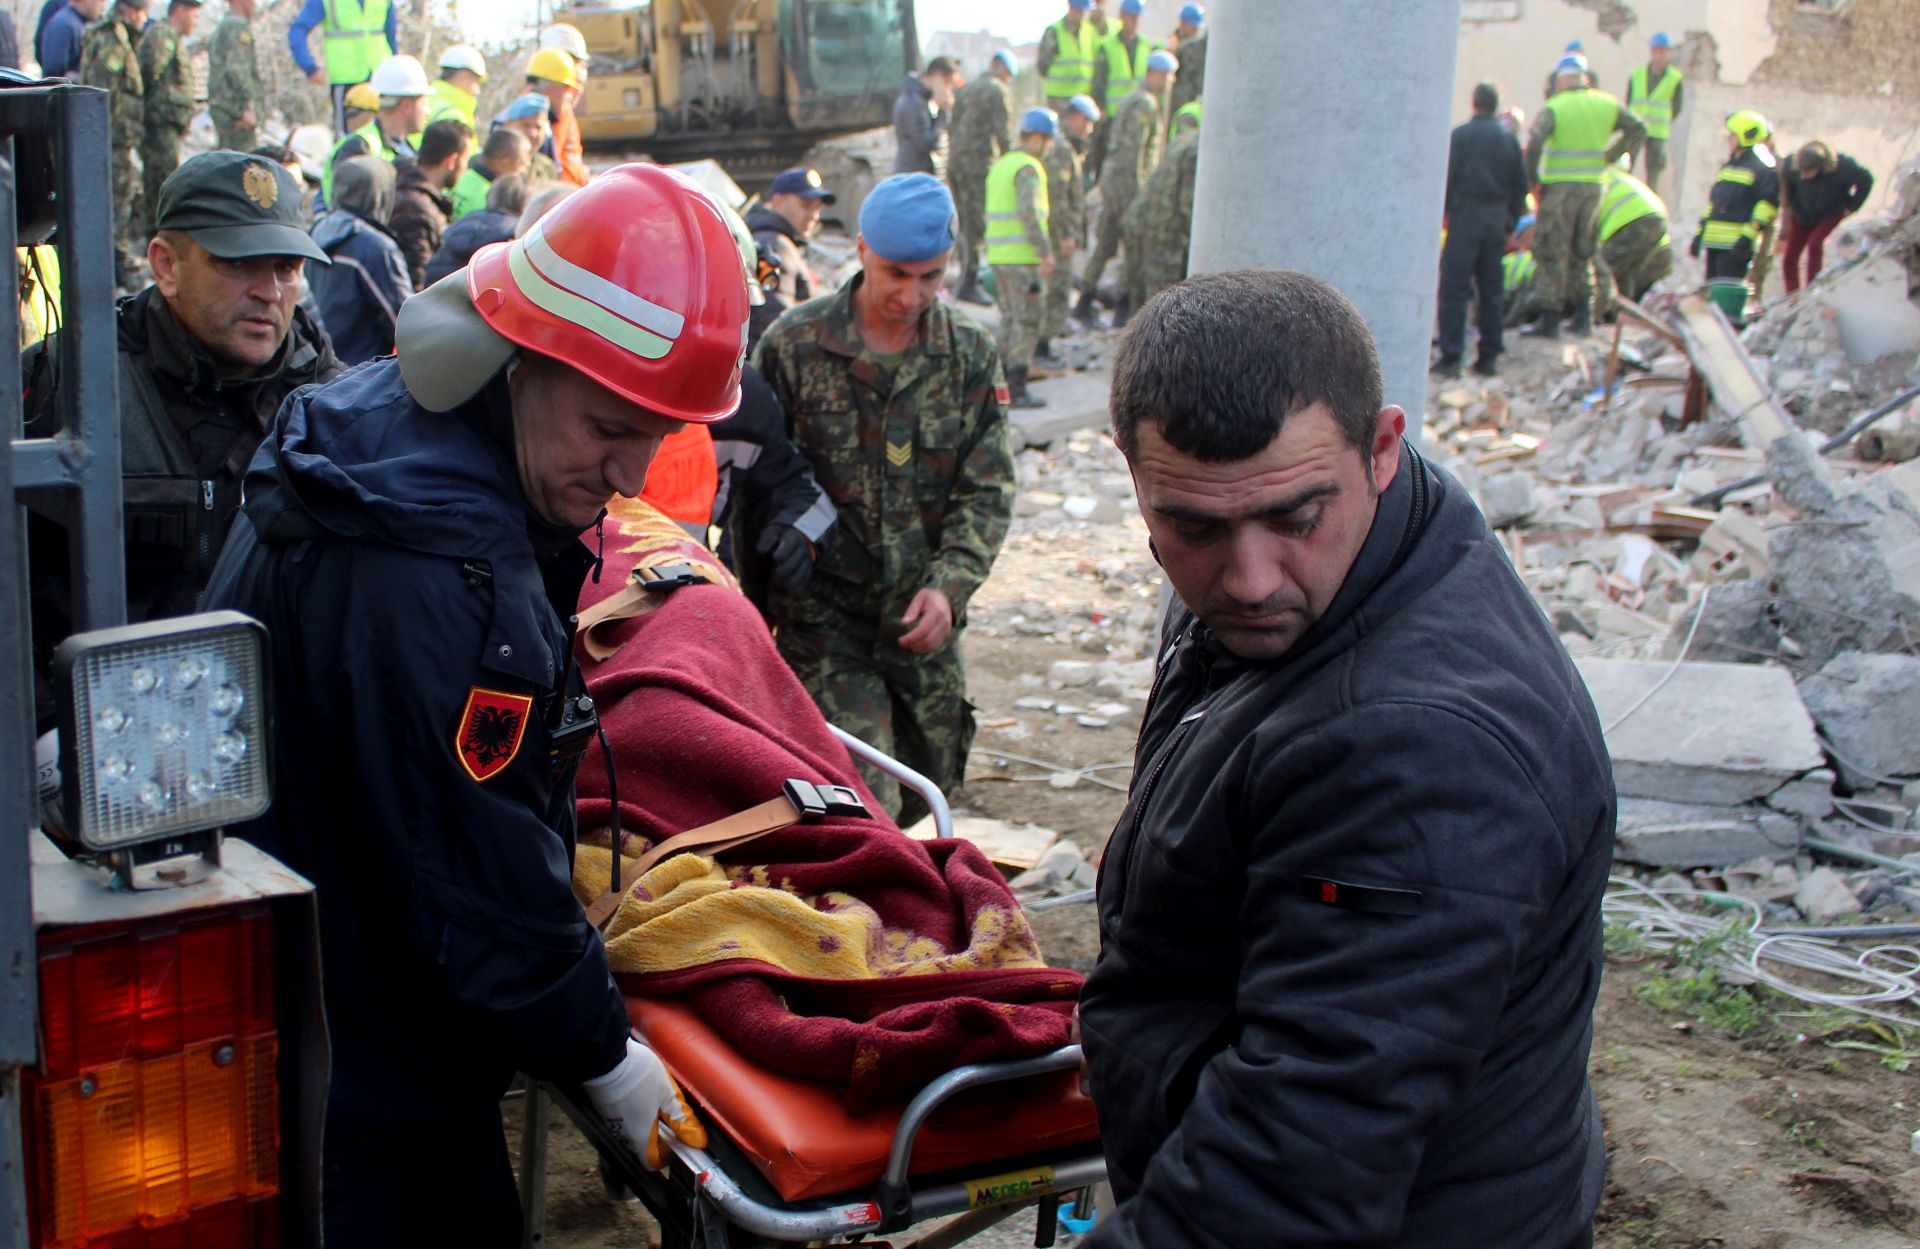 epa08028459 Rescue teams of fire fighters and police transport recovered bodies from the rubble of a building in Thumane, Albania, 27 November 2019. Albania was hit by a 6.4 magnitude earthquake on 26 November 2019, leaving until now over 30 people dead and 200 injured.  EPA/MALTON DIBRA